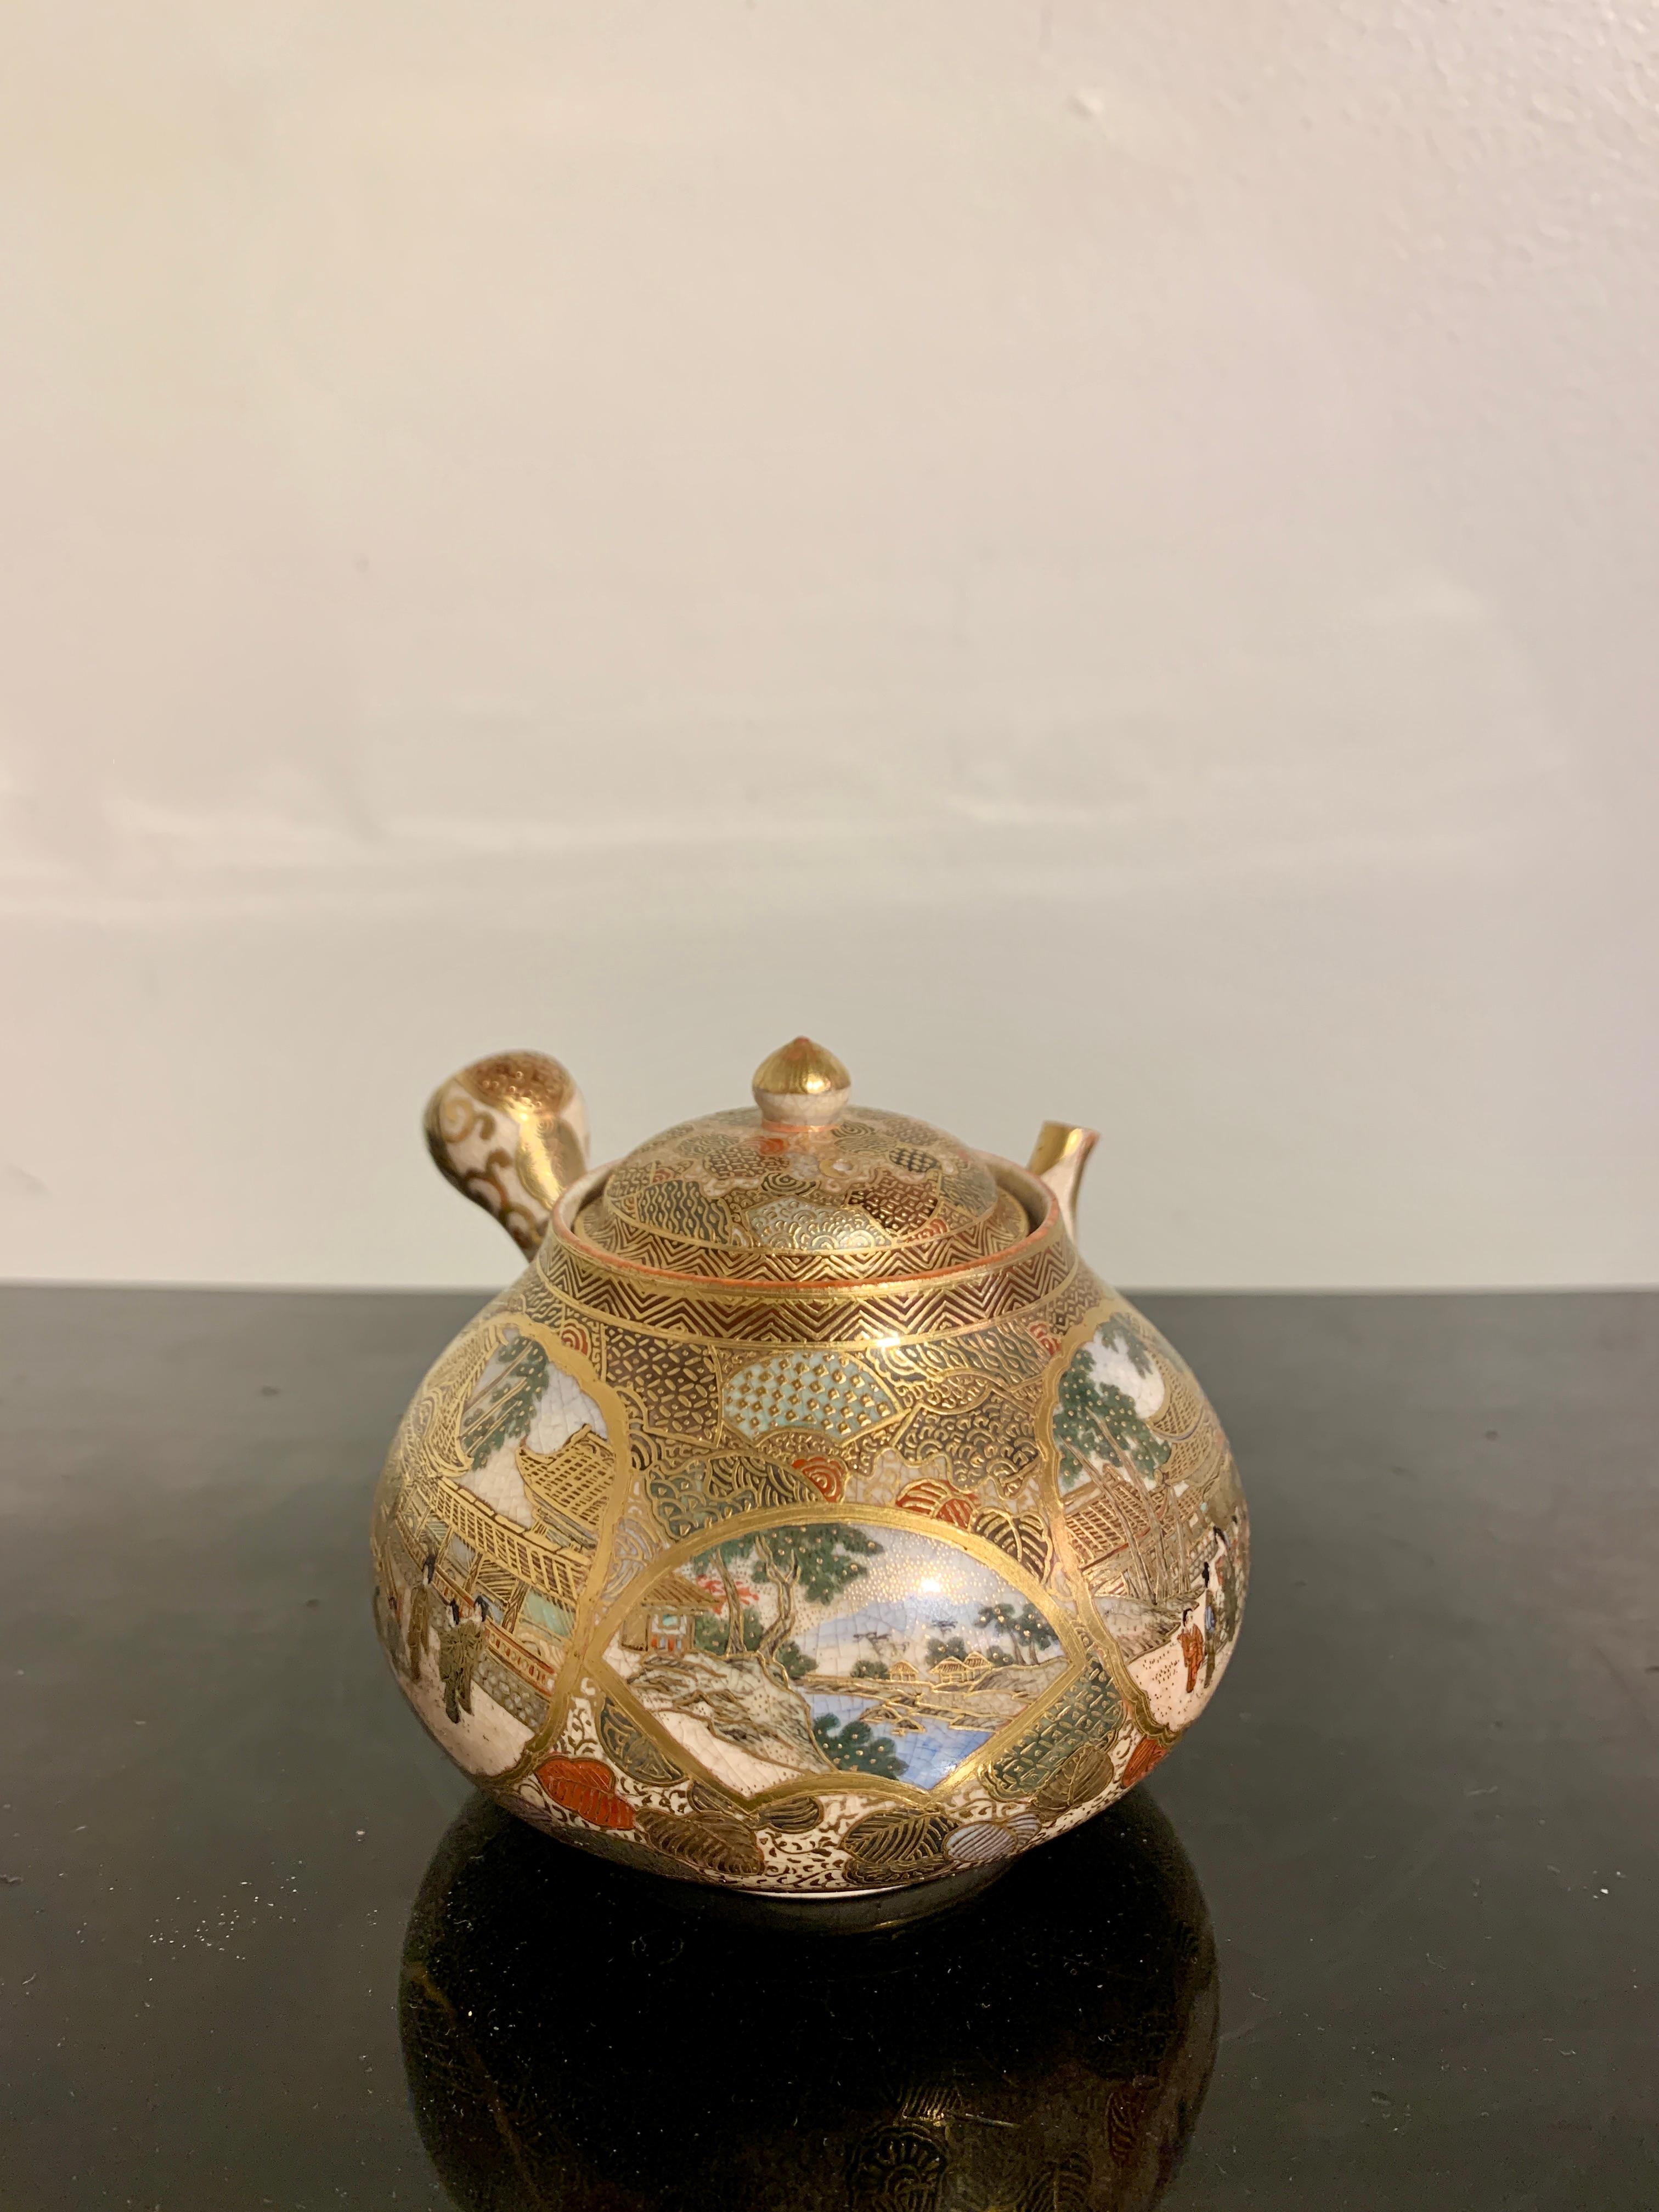 A finely decorated Japanese Satsuma yokode teapot by Senshu, Meiji Period, late 19th century, Japan.

The small teapot of pleasing form and elegant proportions, featuring a globular body tapering slightly at the shoulders, a small spout, and a